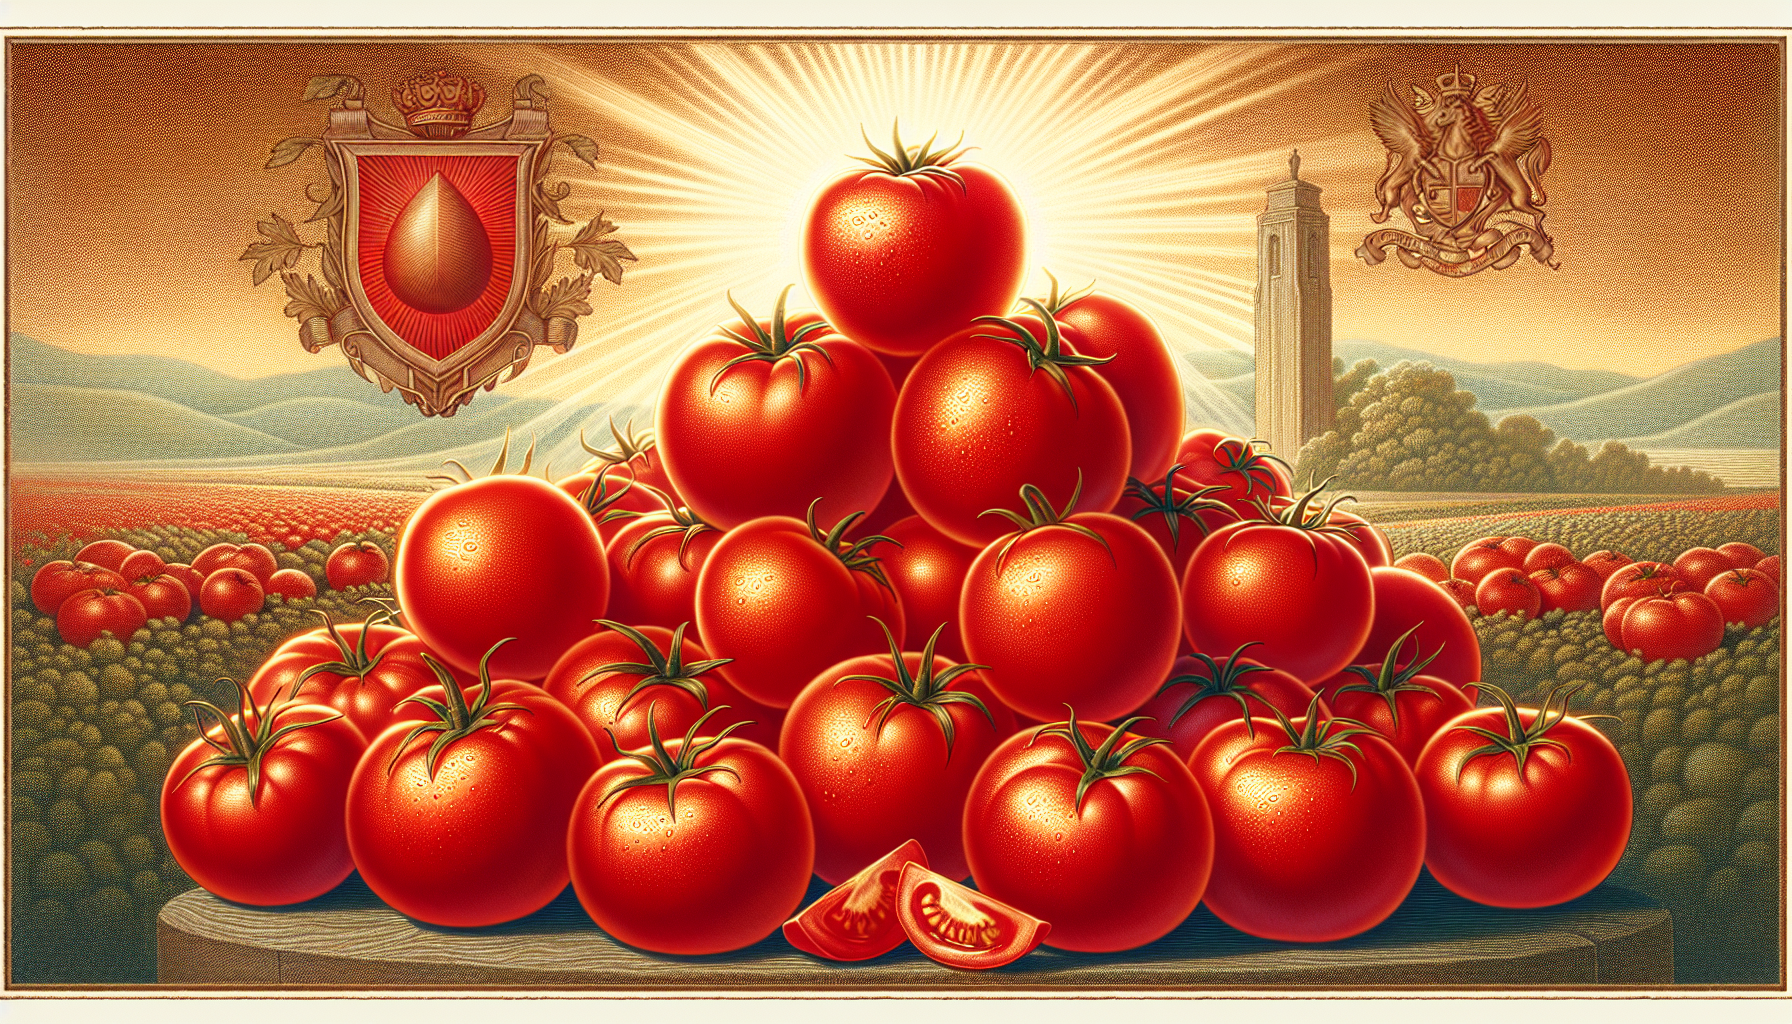 Tomatoes, a source of lycopene